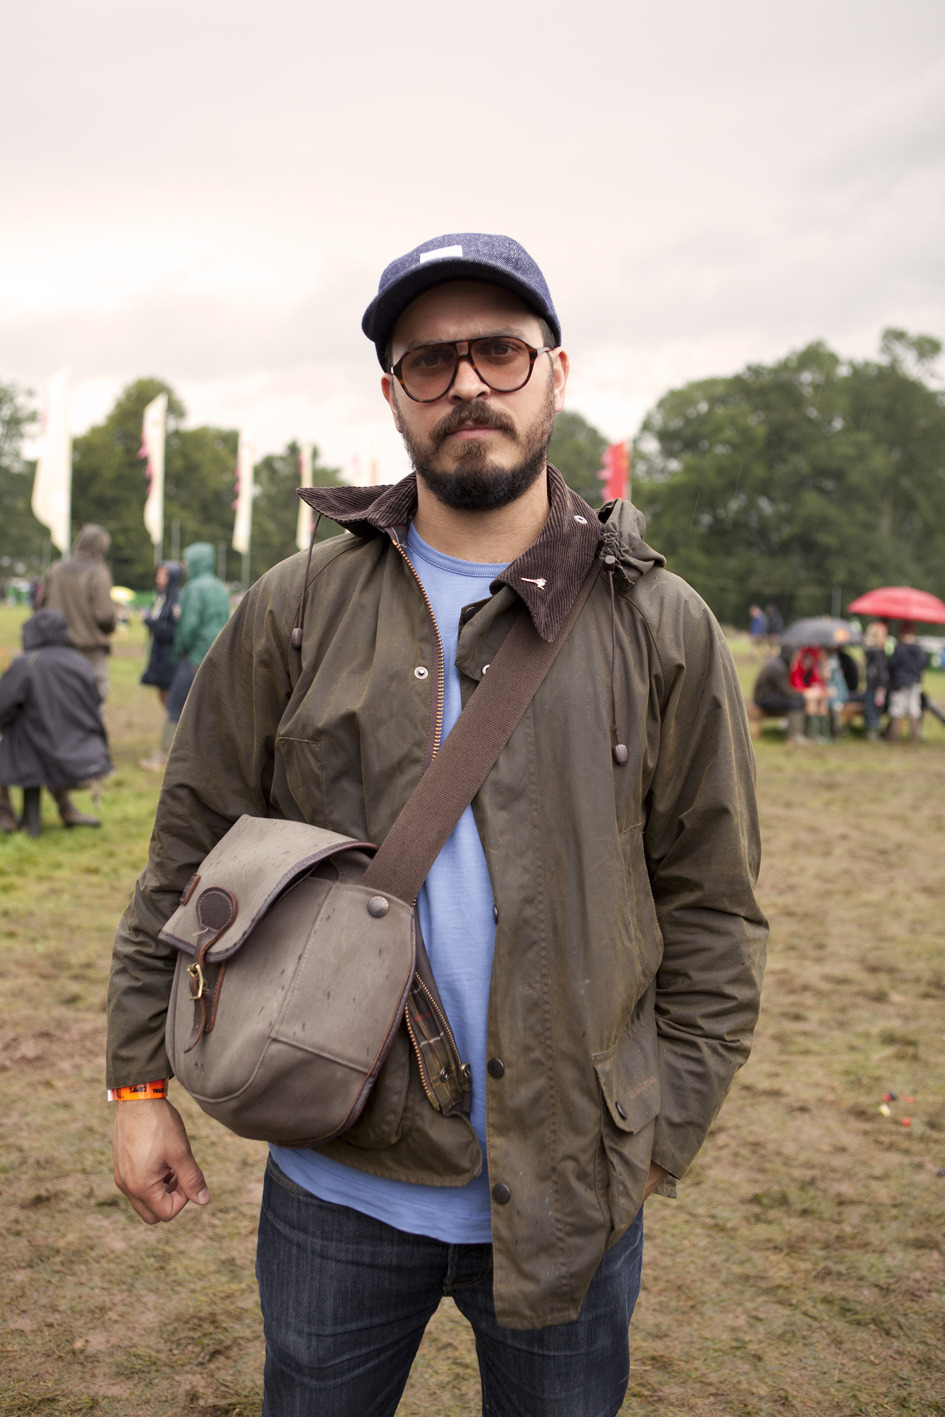 Barbour People — Rocking a Barbour wax jacket at Green Man Festival